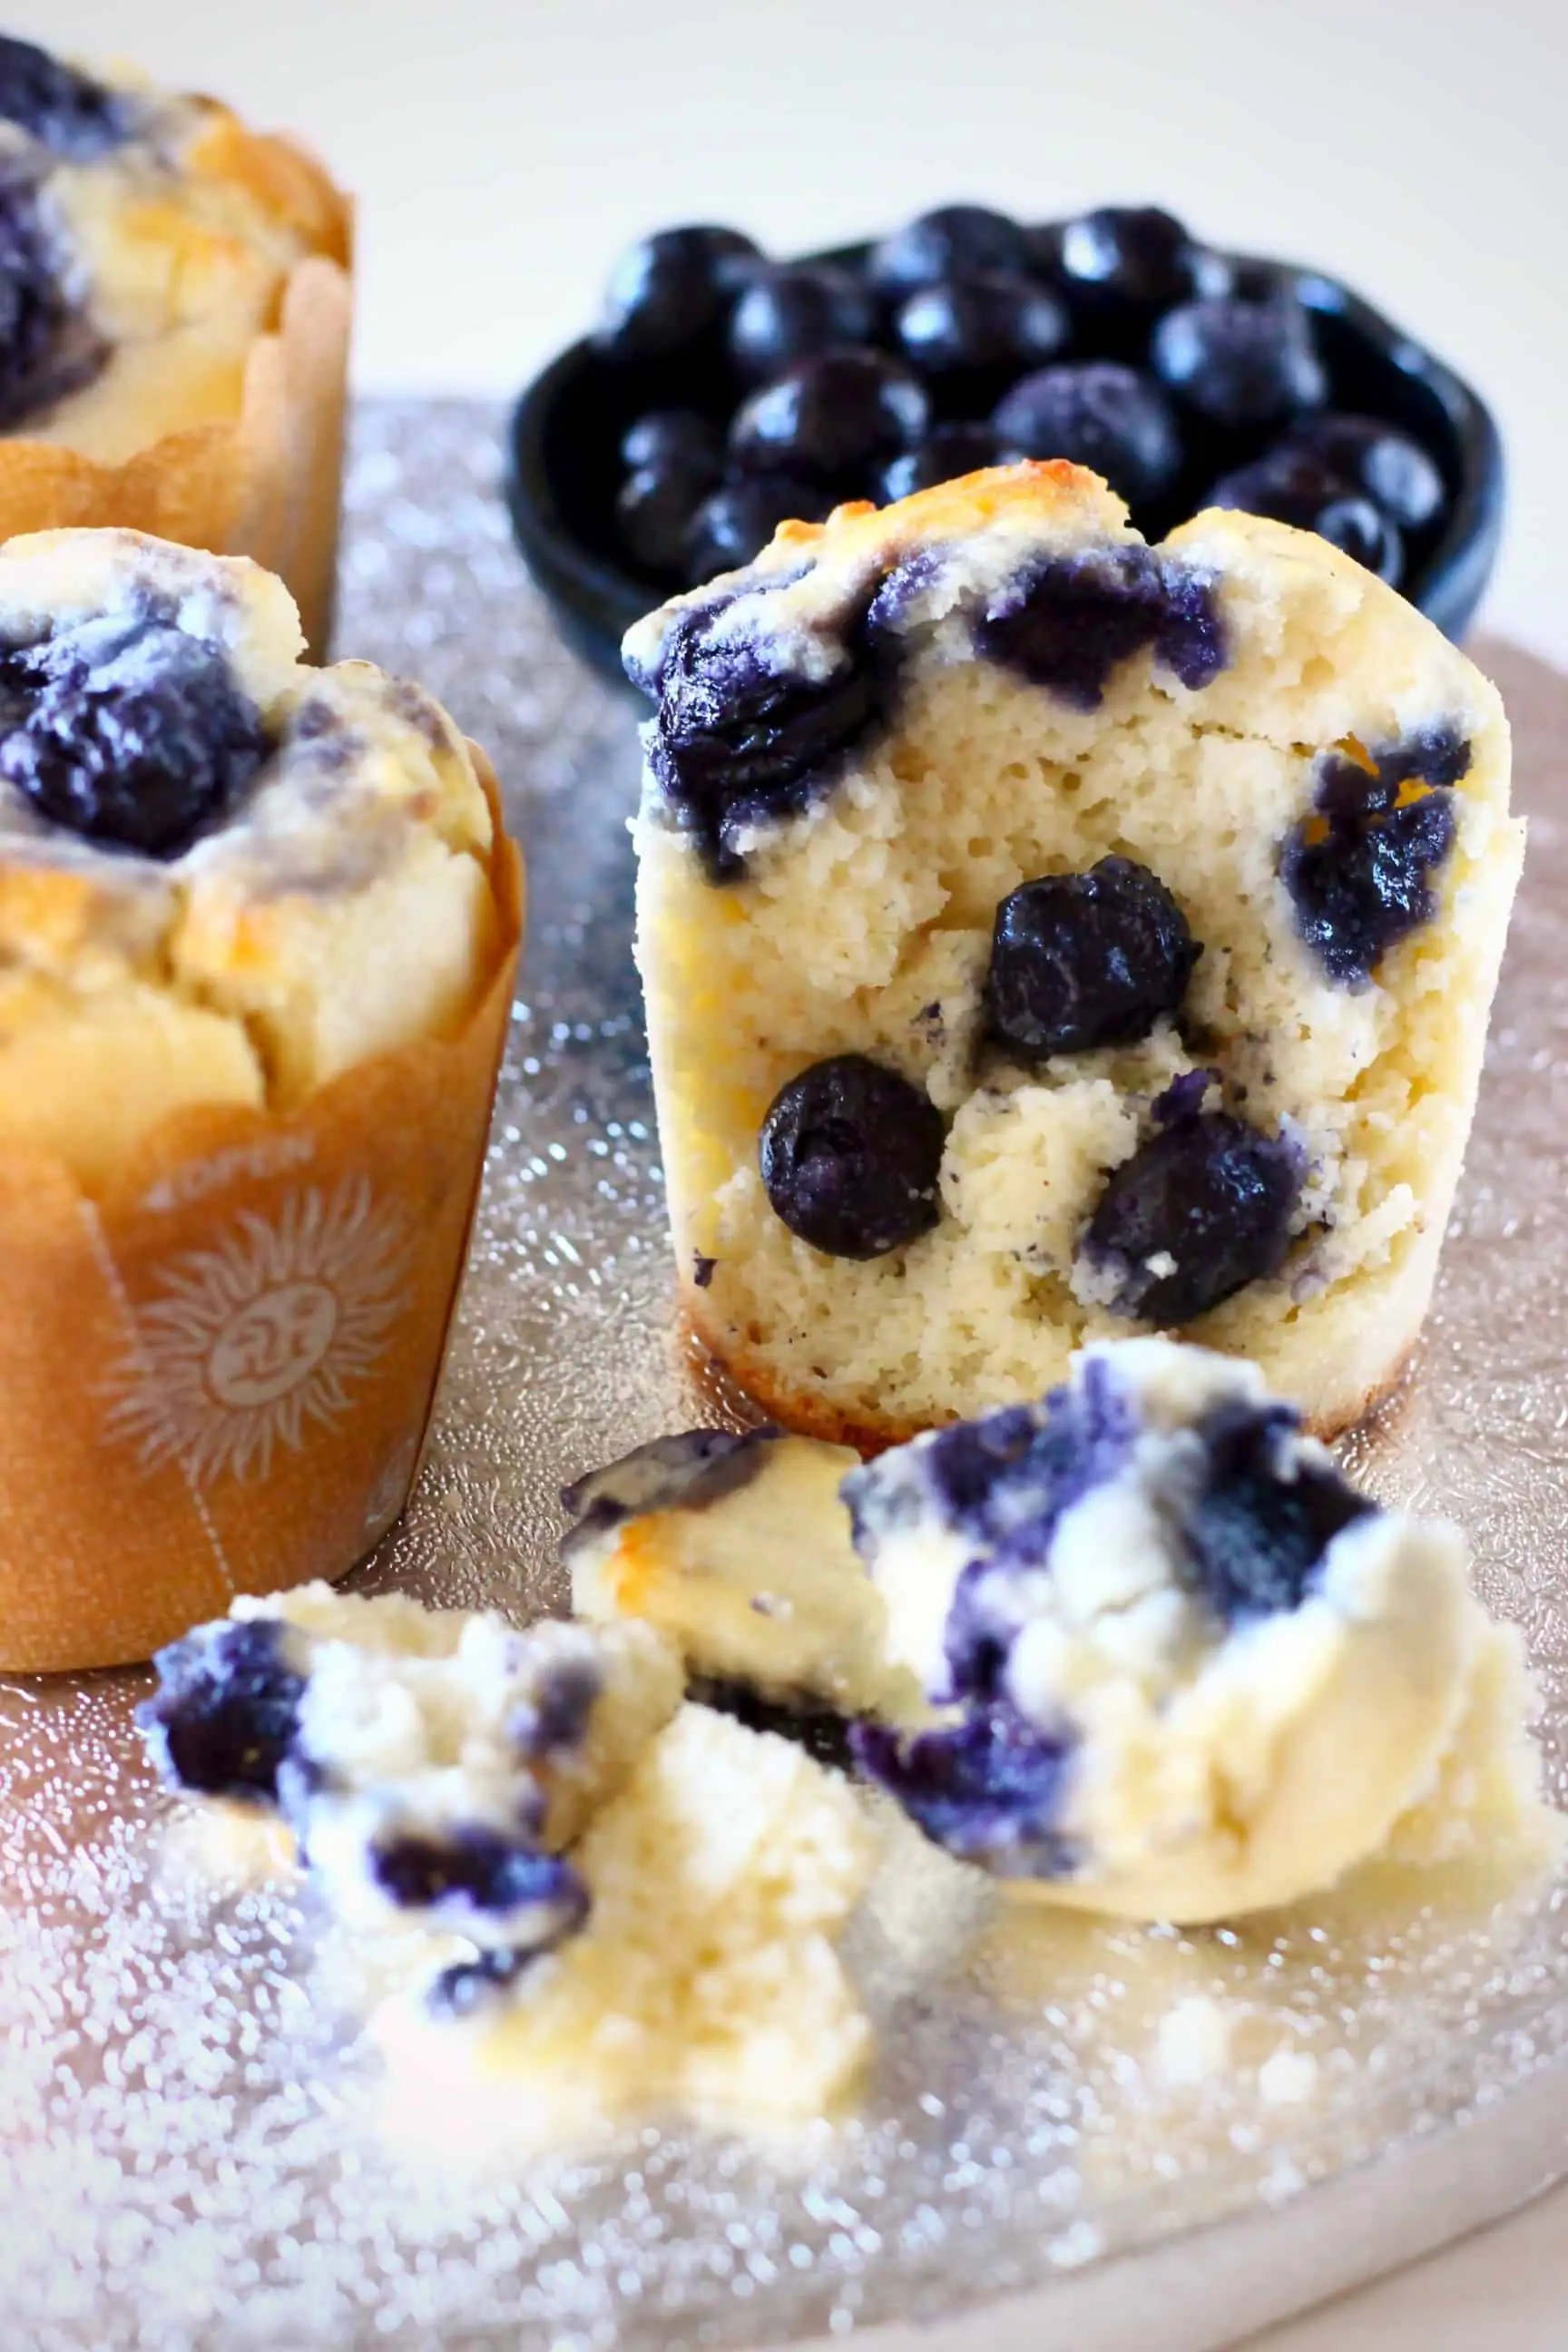 Three blueberry muffins, one with a bite taken out of it, with a bowl of fresh blueberries in the background